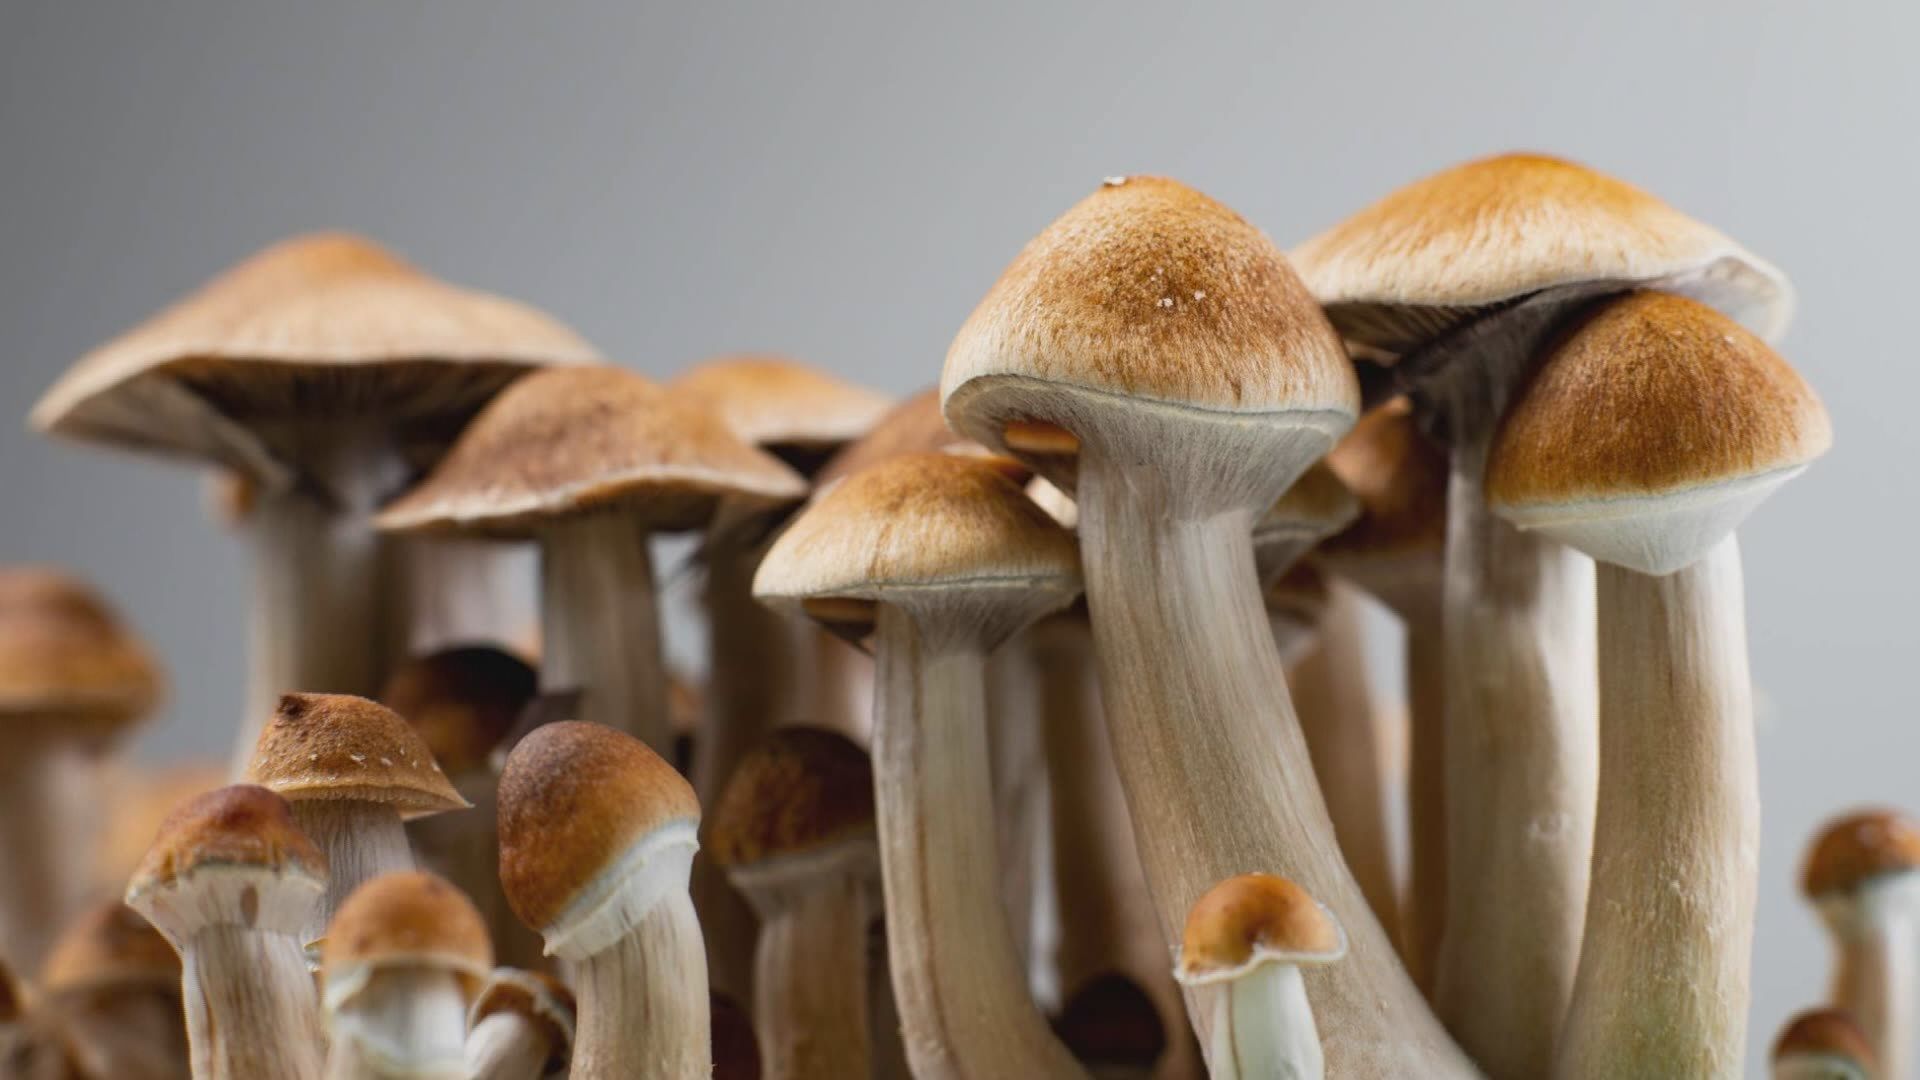 Breaking: Psychedelics approved for medical use in Canada